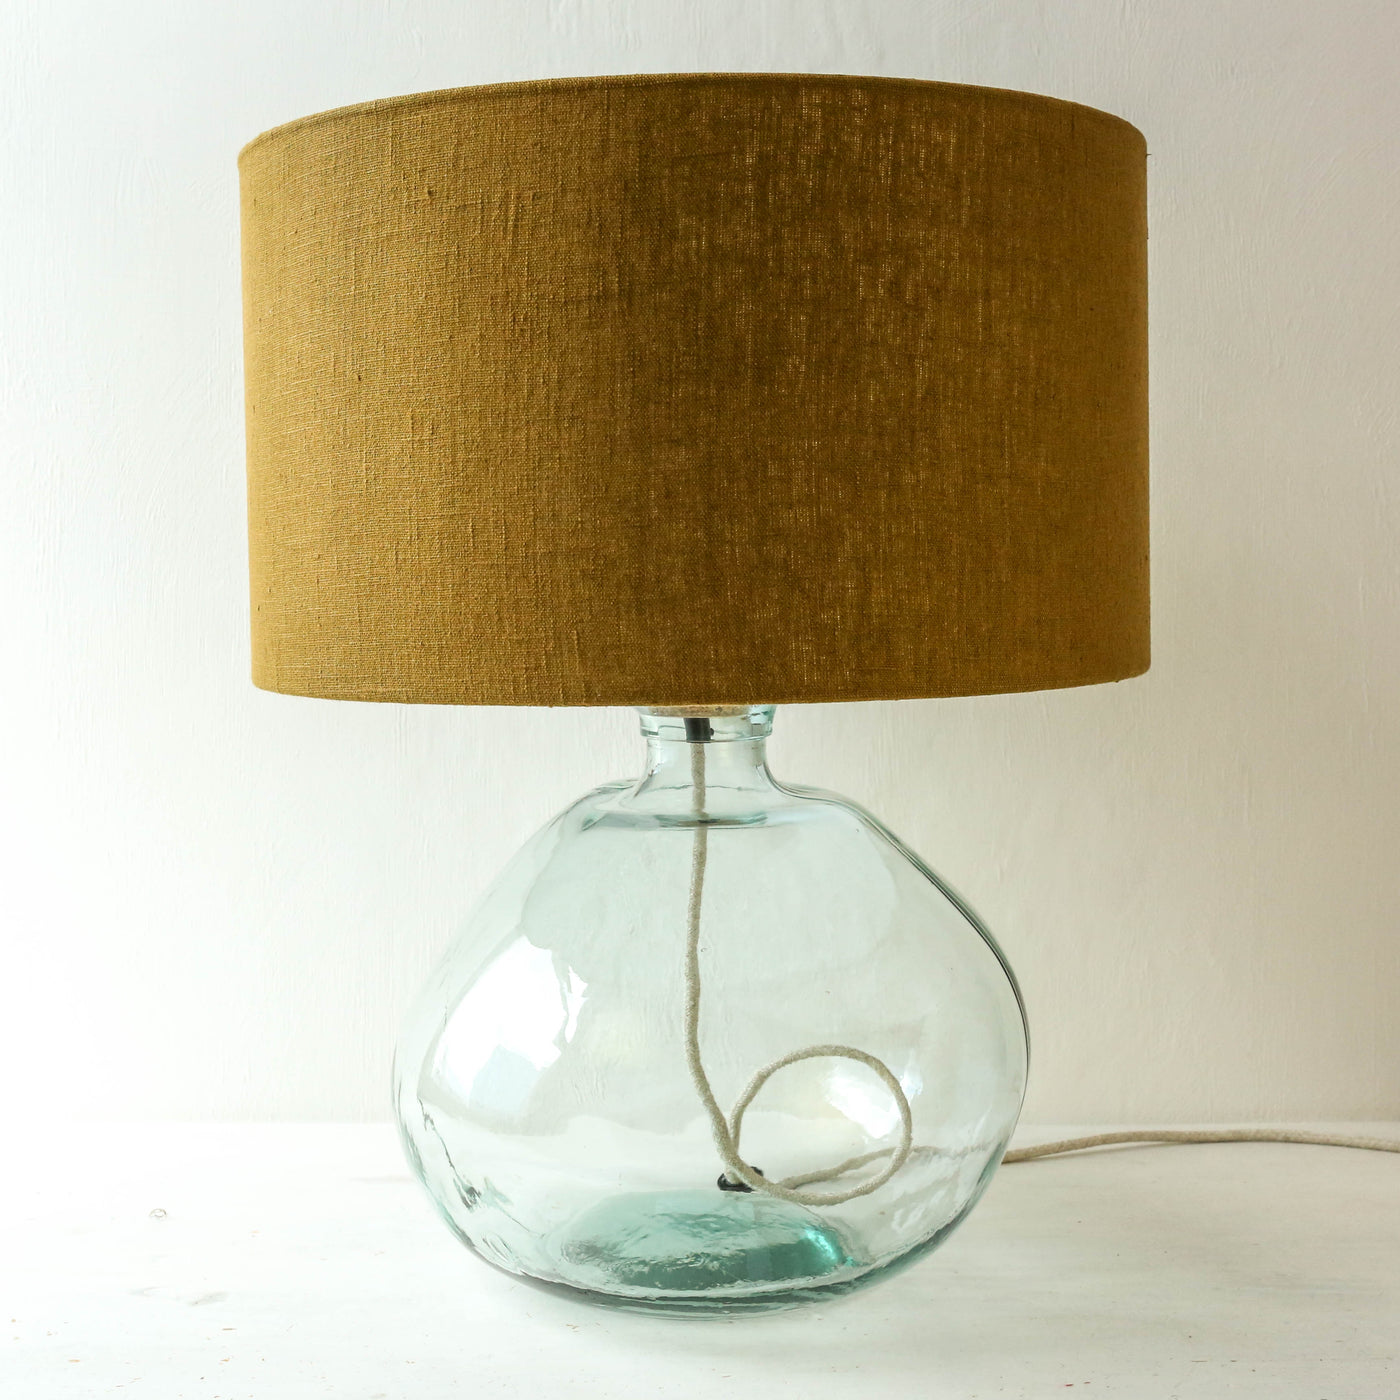 Large Recycled Glass Irregular Shape Lamp Base - Local Pickup Only